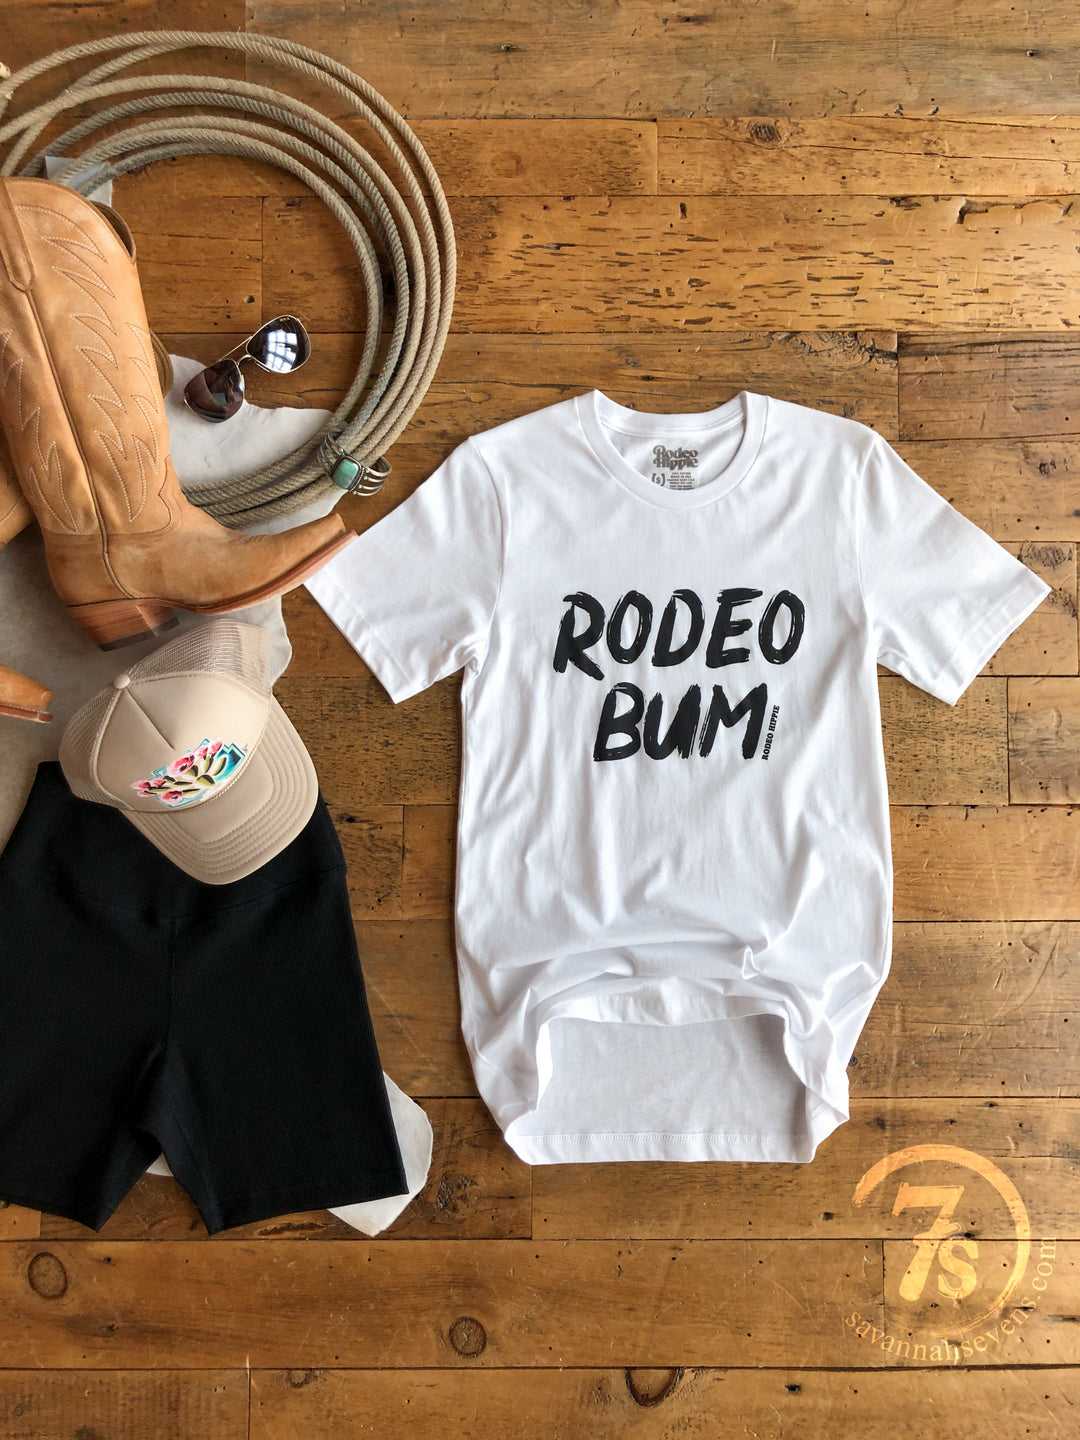 The Rodeo Bum